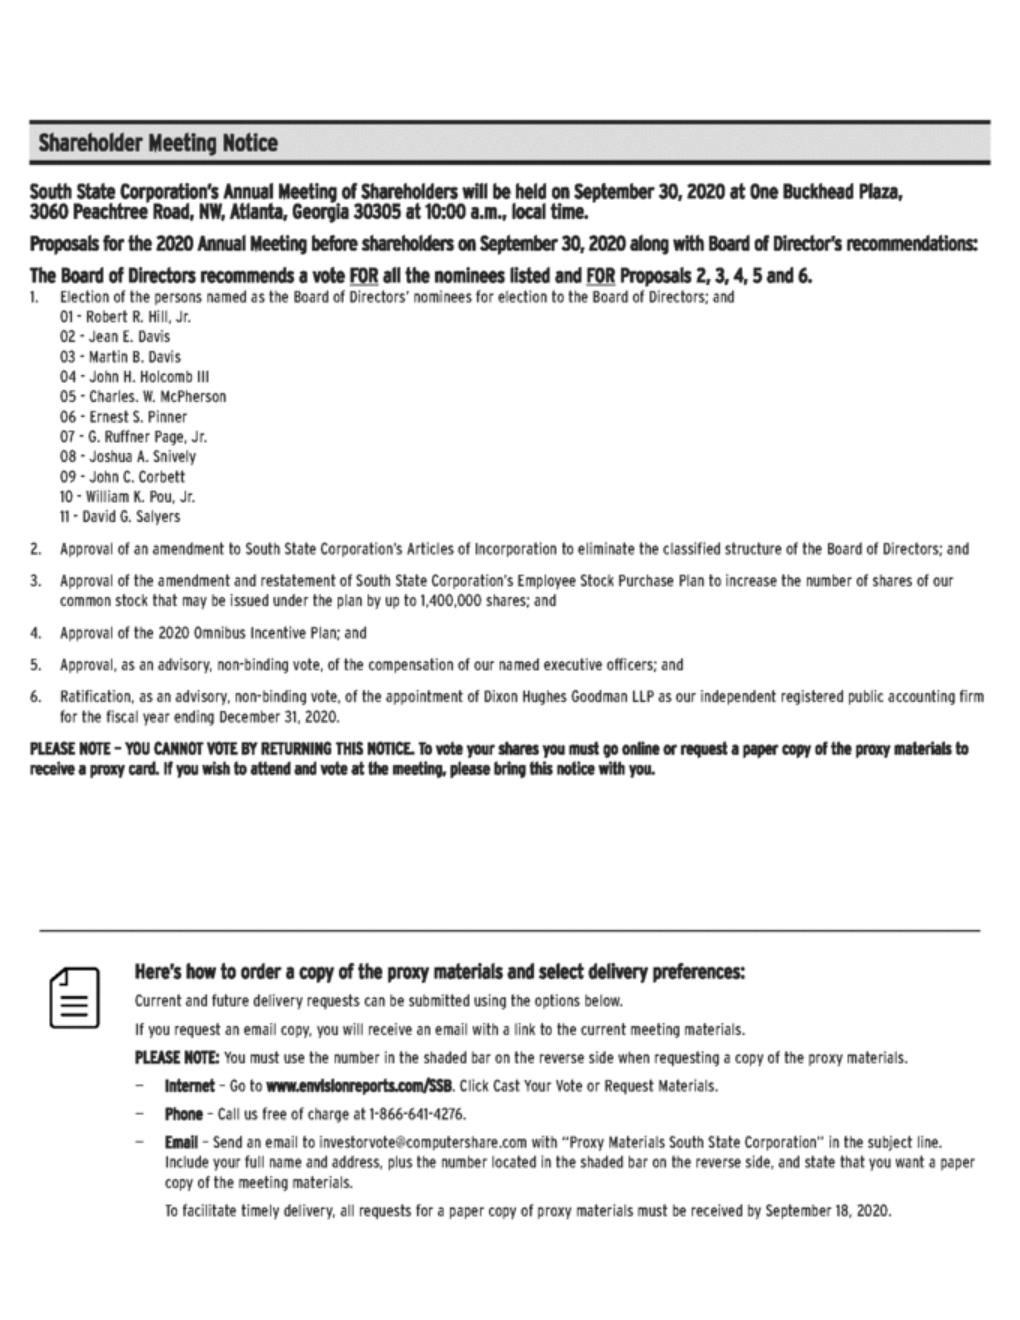 New Microsoft Word Document (2)_03avla south state notice 07 28 20_page_2.gif